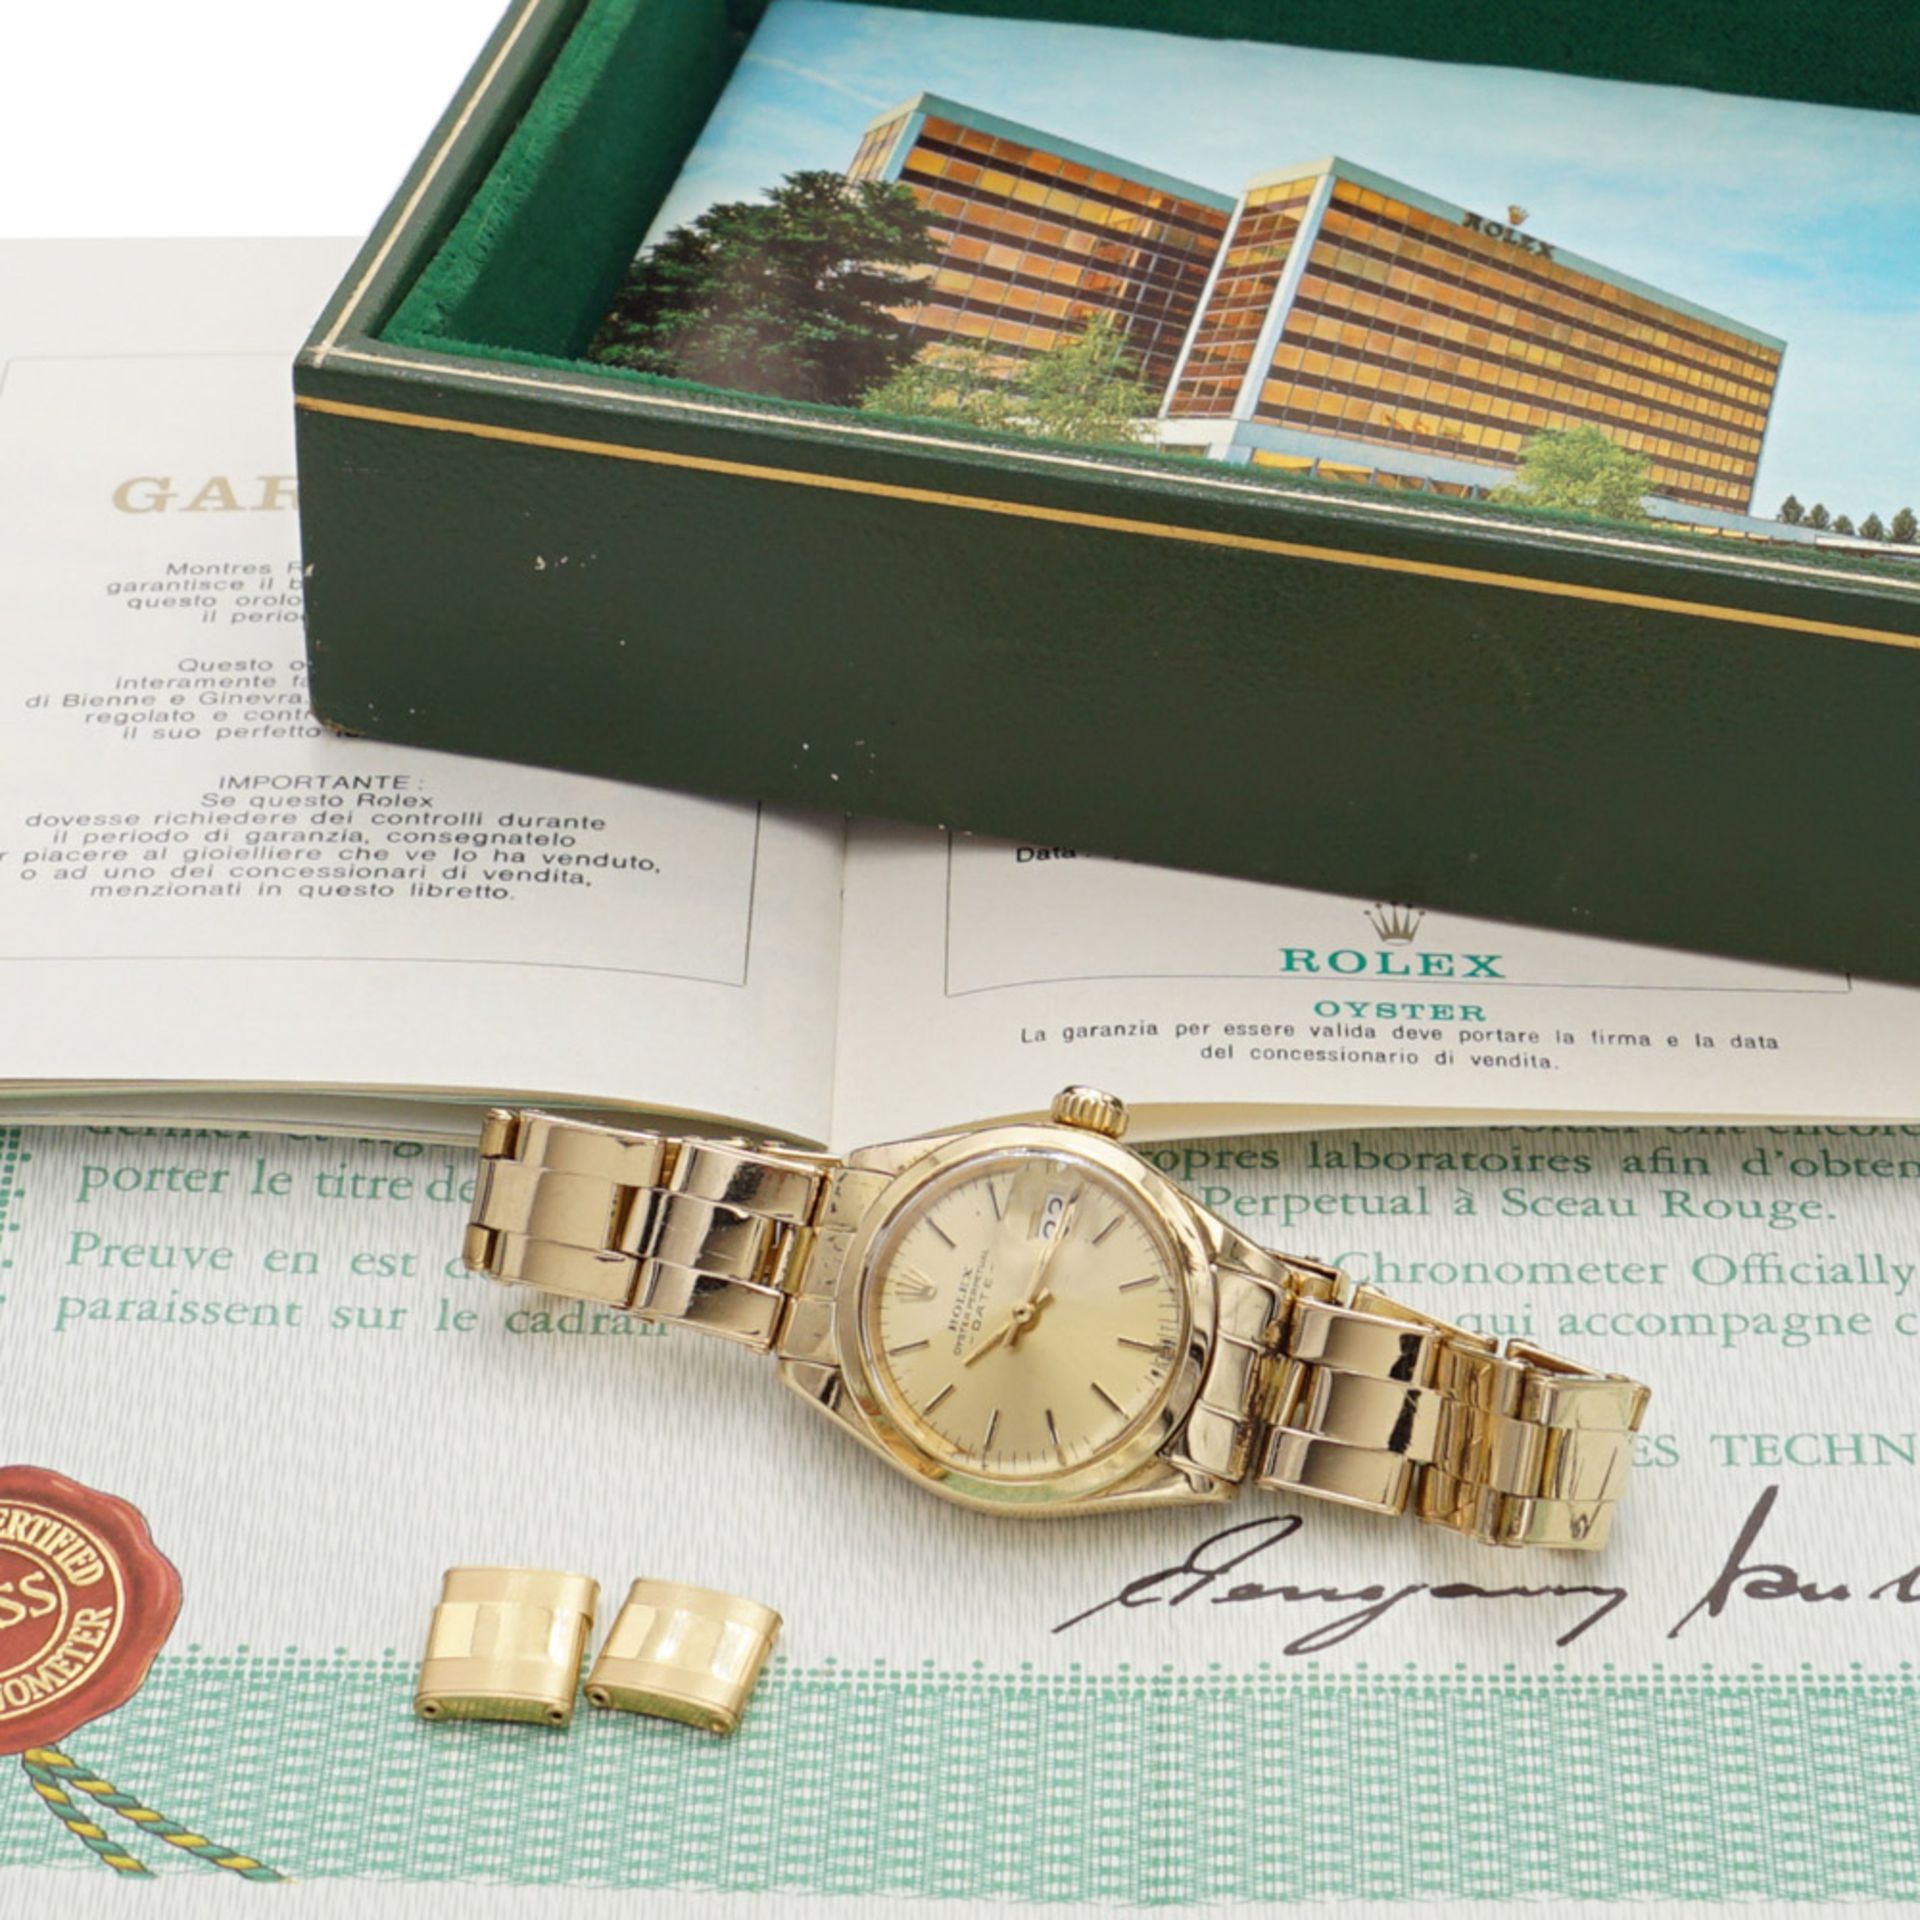 Rolex oyster Perpetual Date, ladies watch - Image 2 of 2